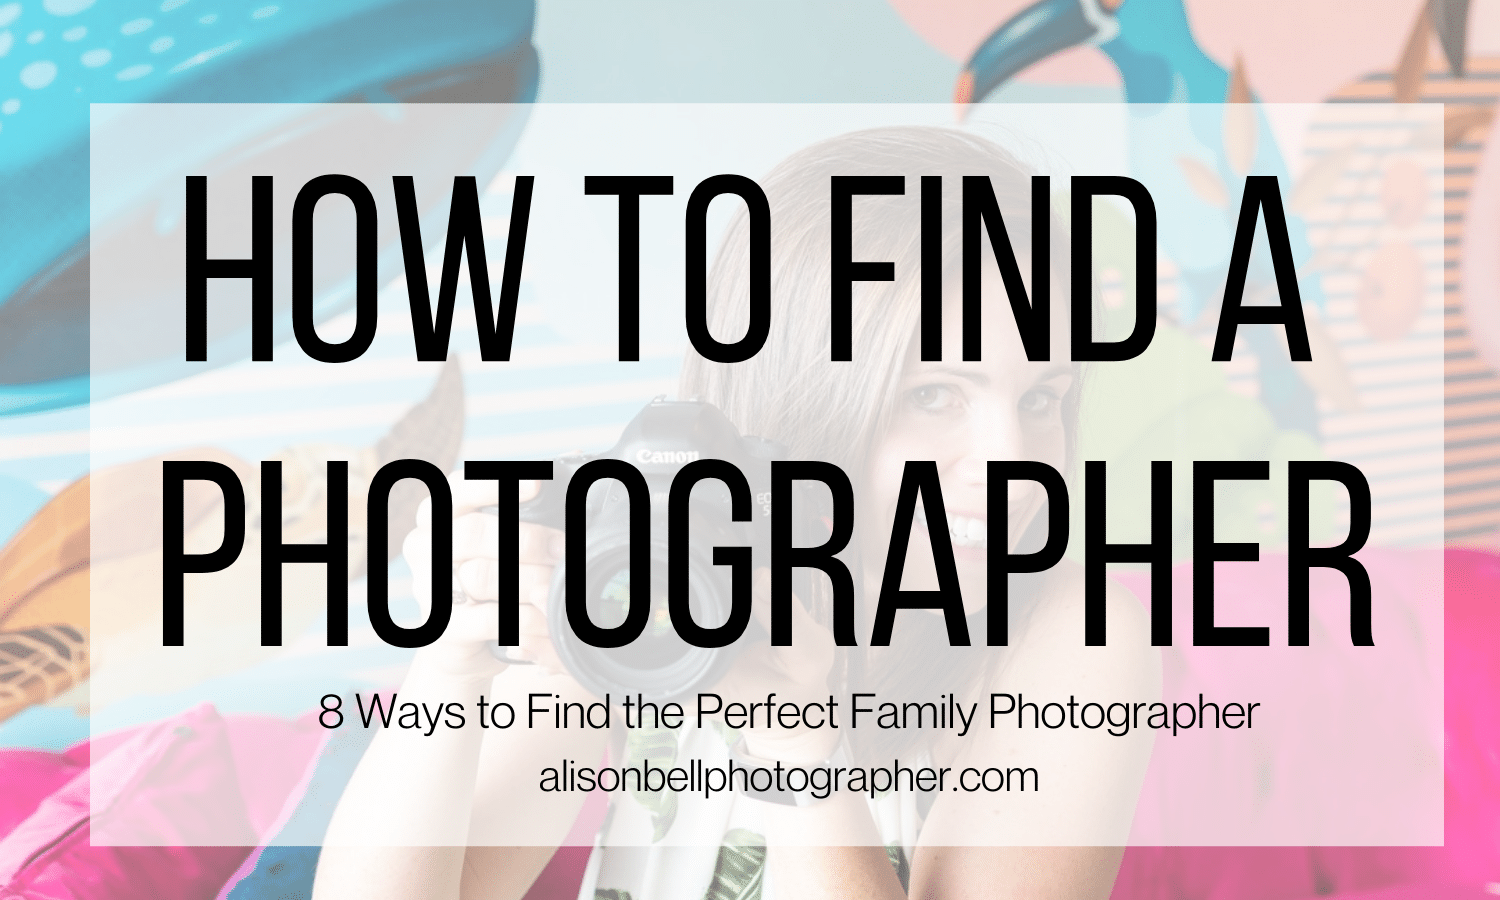 8 ways to find the perfect family photographer, how to find a family photogrpaher